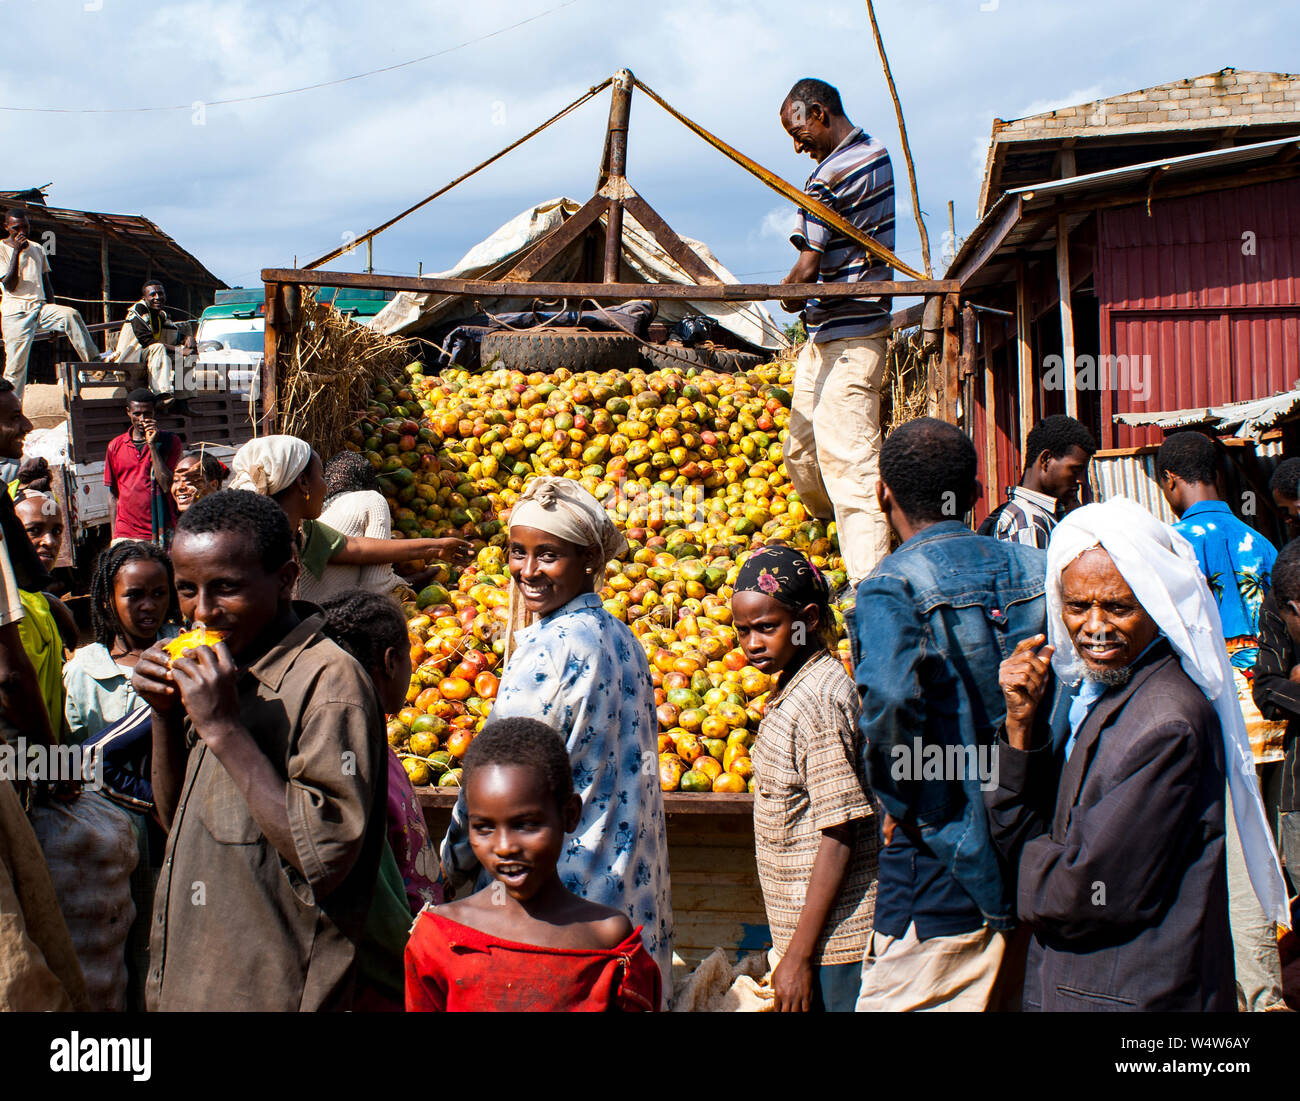 Lorry selling mangoes surrounded by people in a rural market in Illubabor, Ethiopia Stock Photo